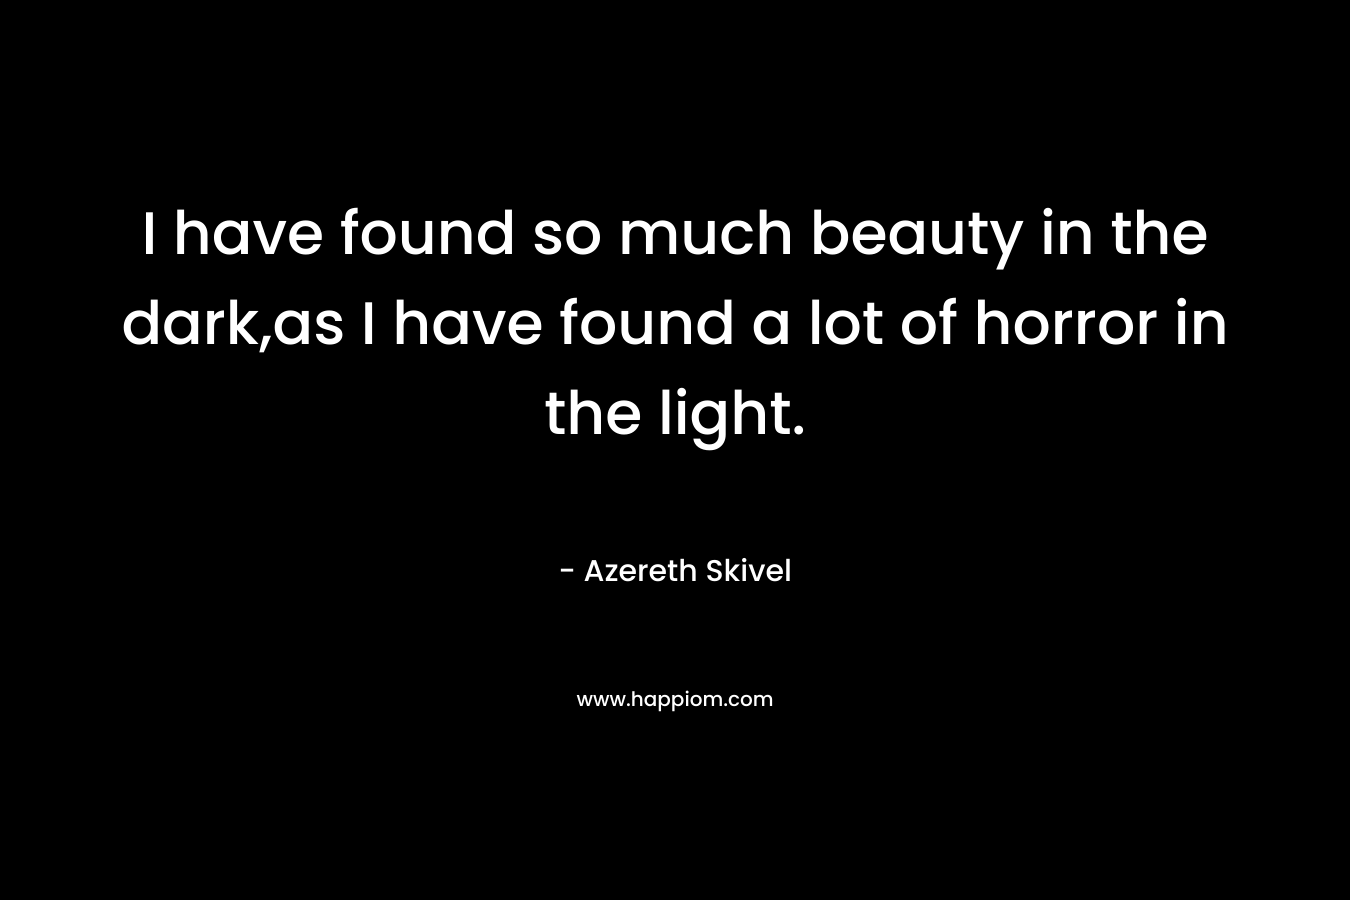 I have found so much beauty in the dark,as I have found a lot of horror in the light. – Azereth Skivel